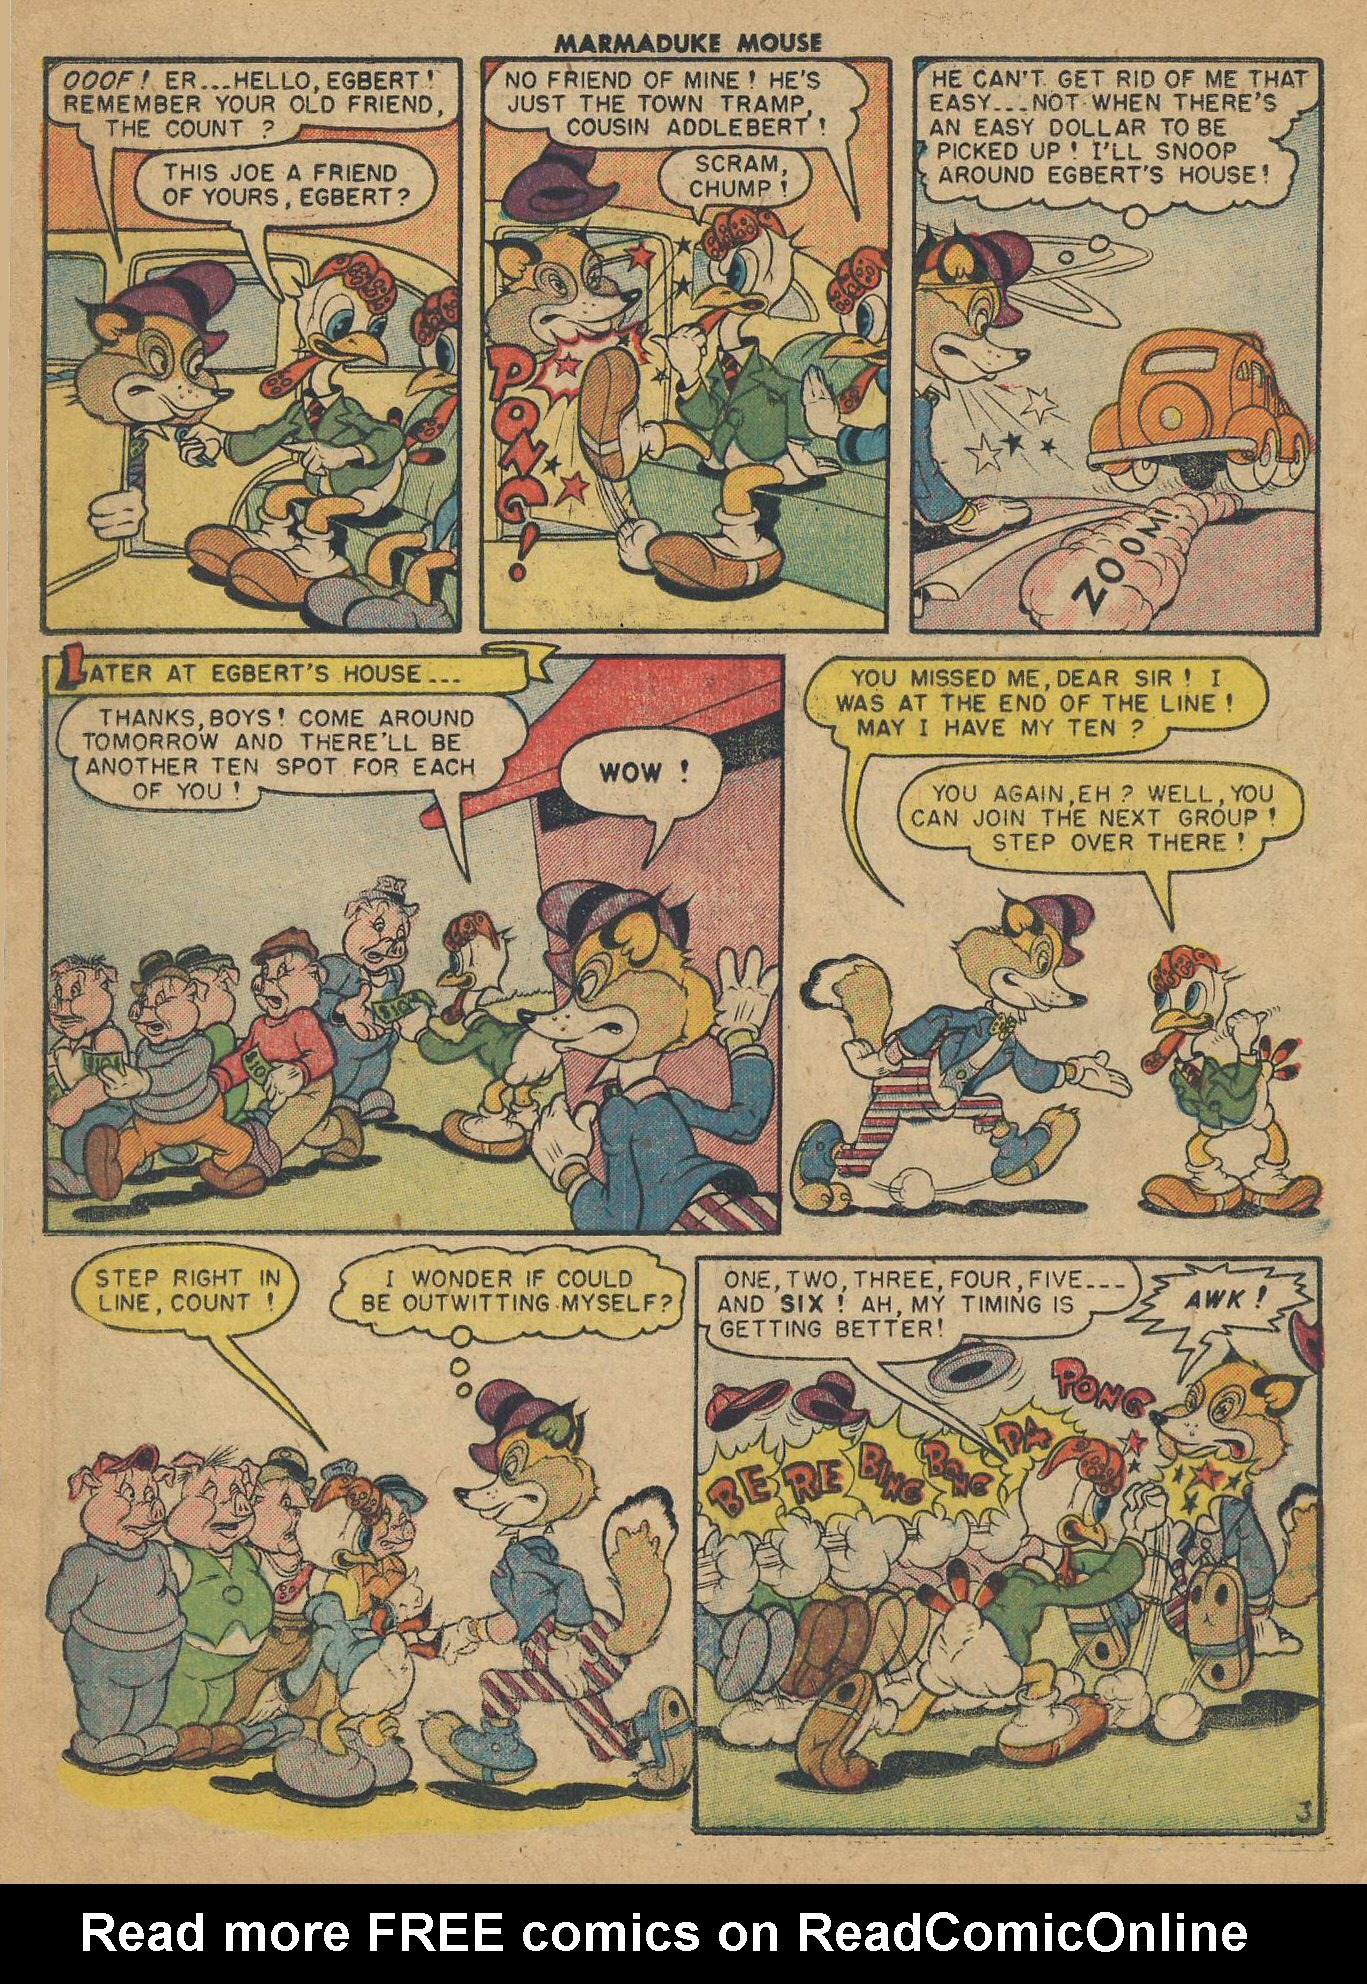 Read online Marmaduke Mouse comic -  Issue #54 - 12